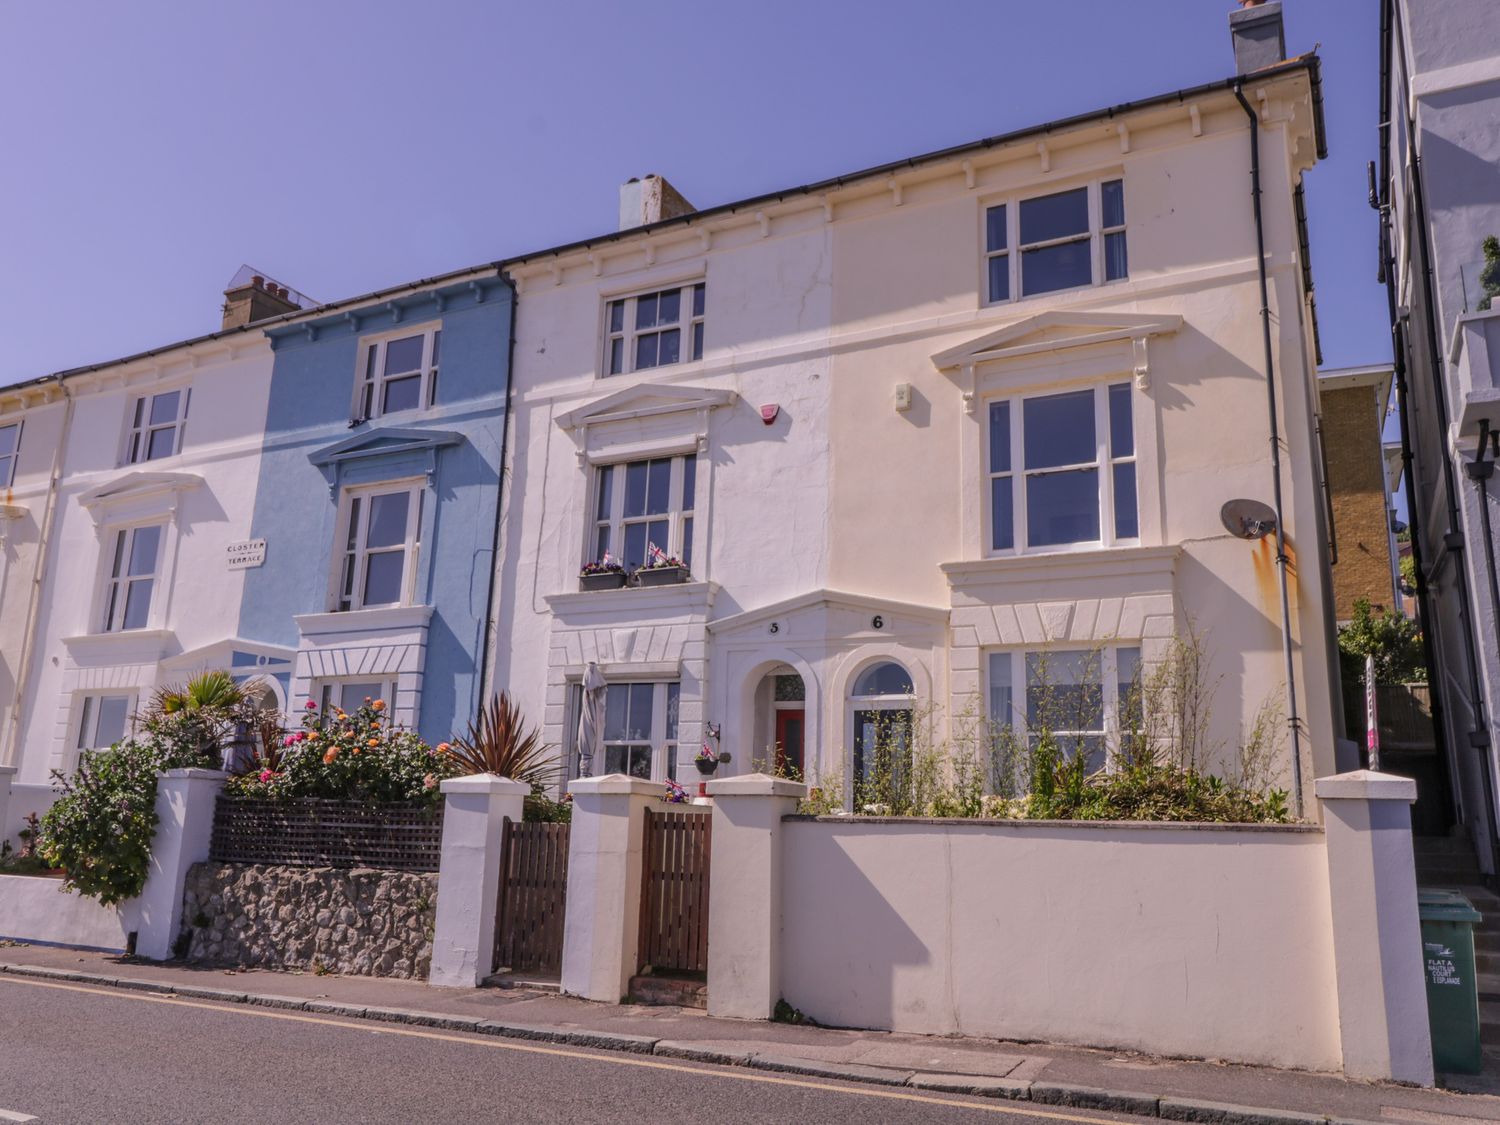 6 Gloster Terrace - Kent & Sussex - 1108475 - photo 1